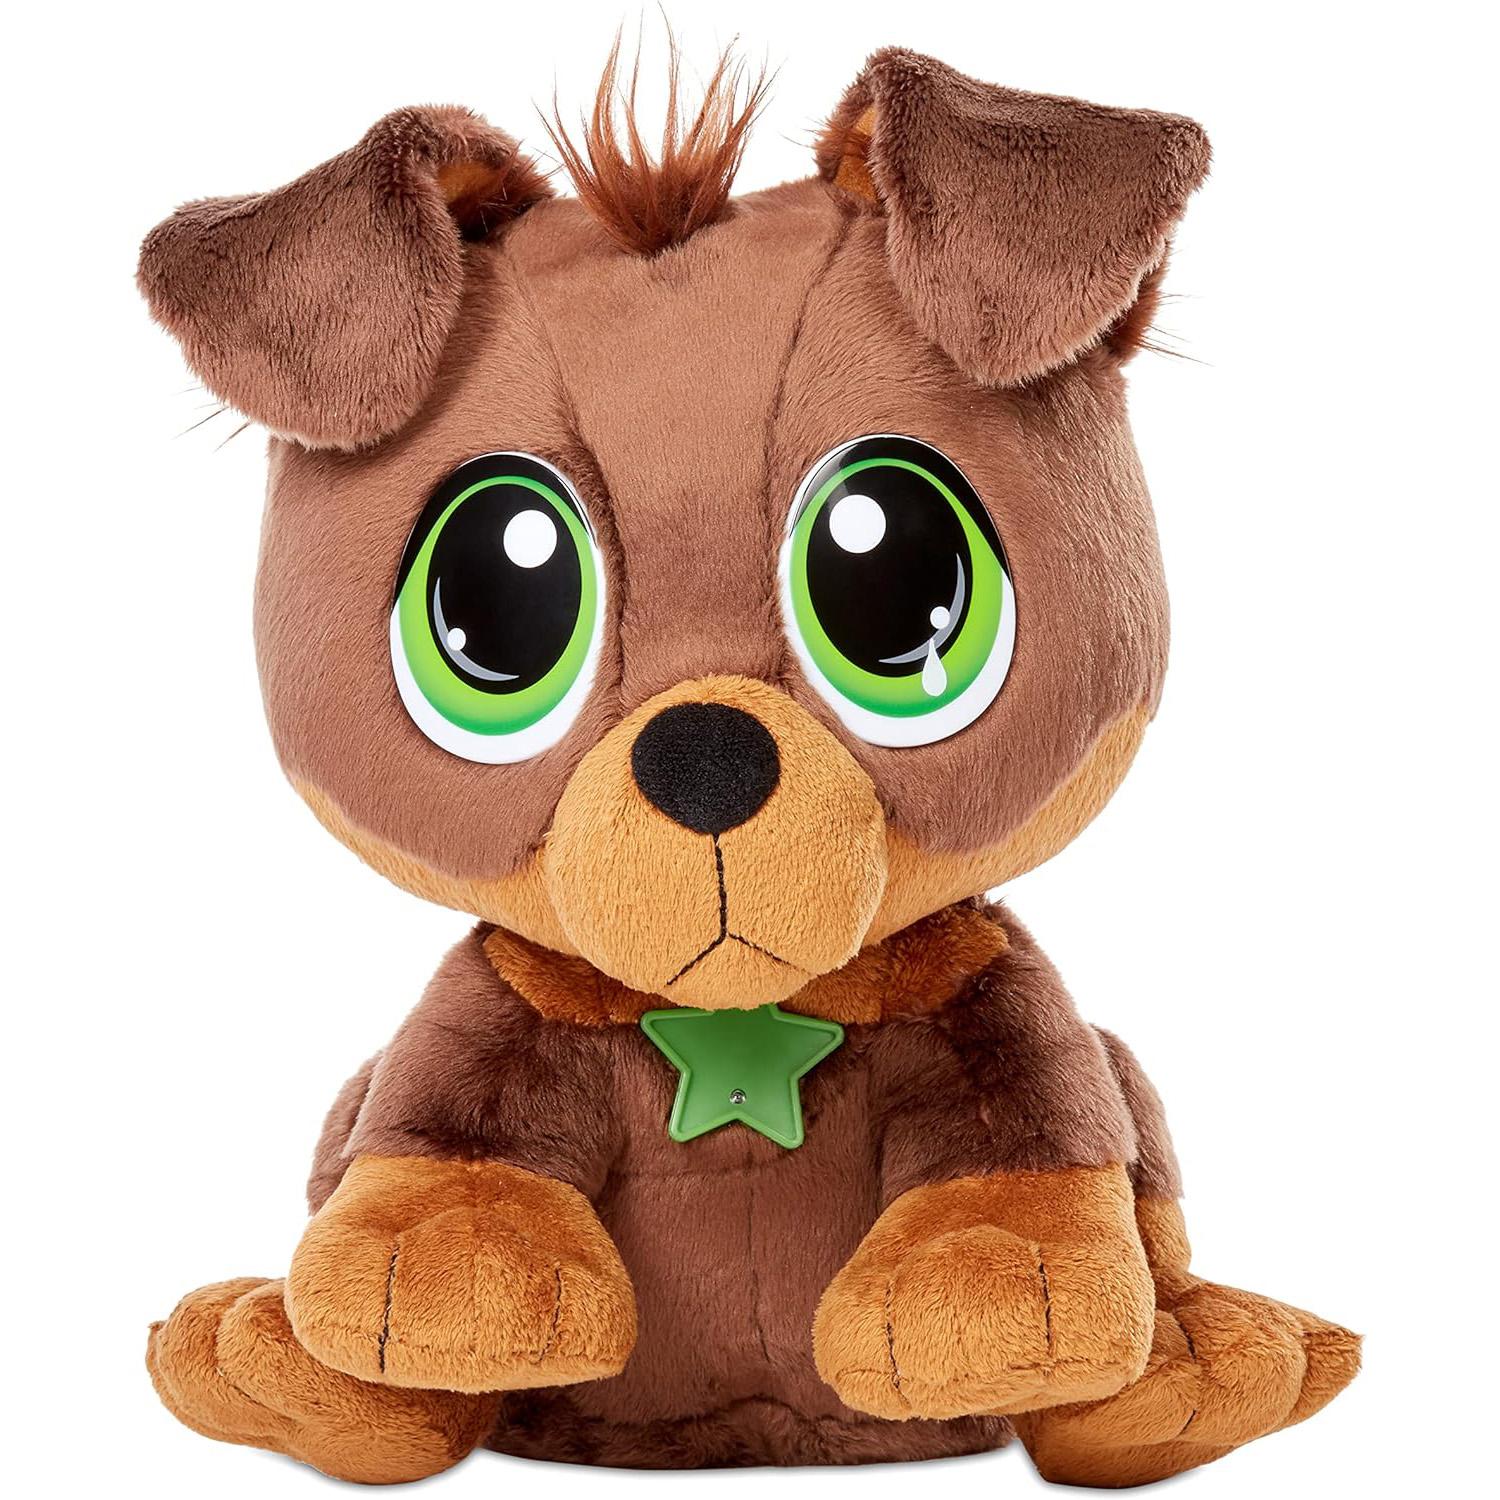 Little Tikes Rescue Tales Adoptable Pet Interactive Plush Toys for $9.25